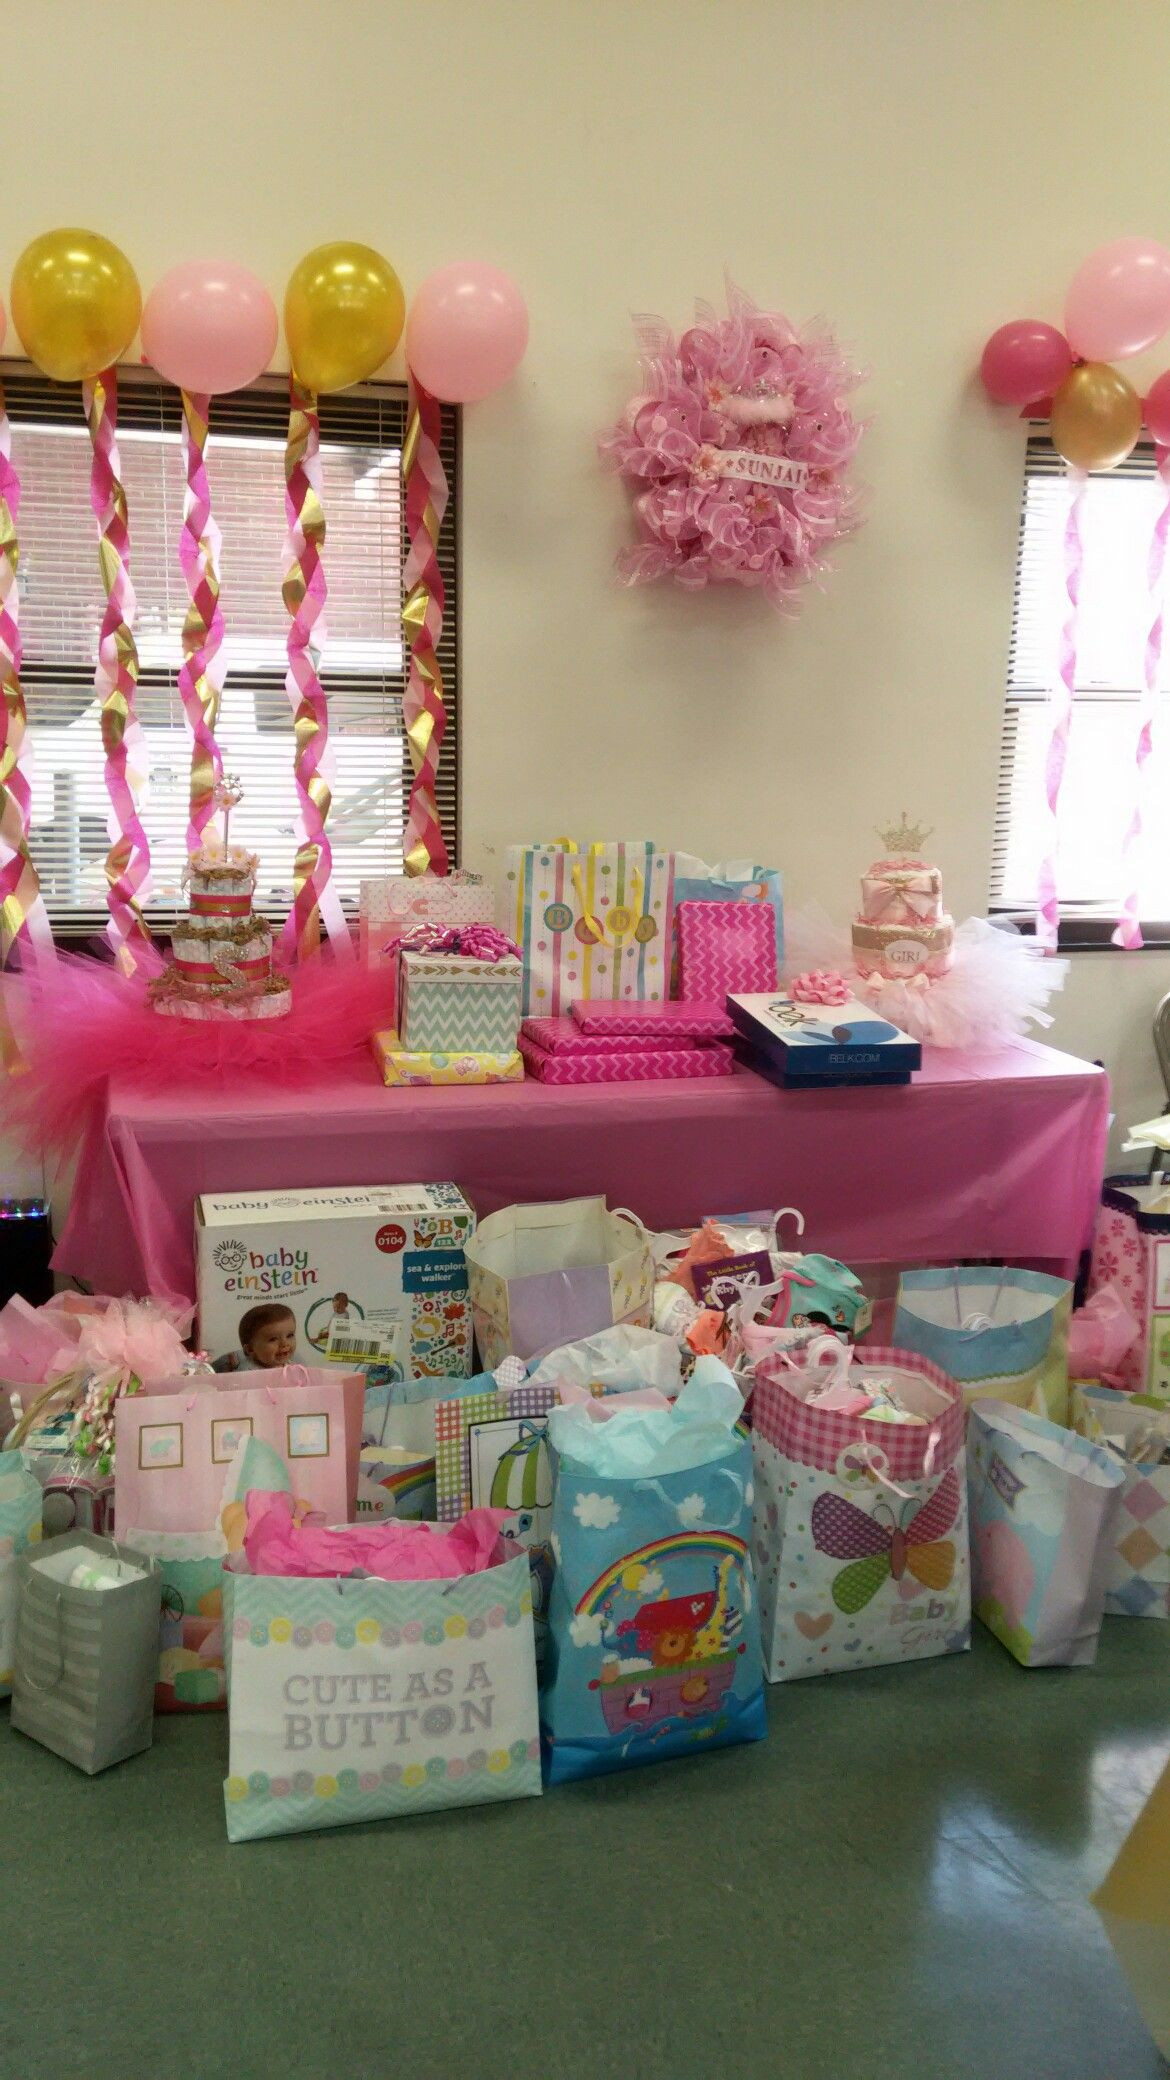 Decorating Ideas For Baby Shower Gift Table
 My niece s baby shower t table in 2019